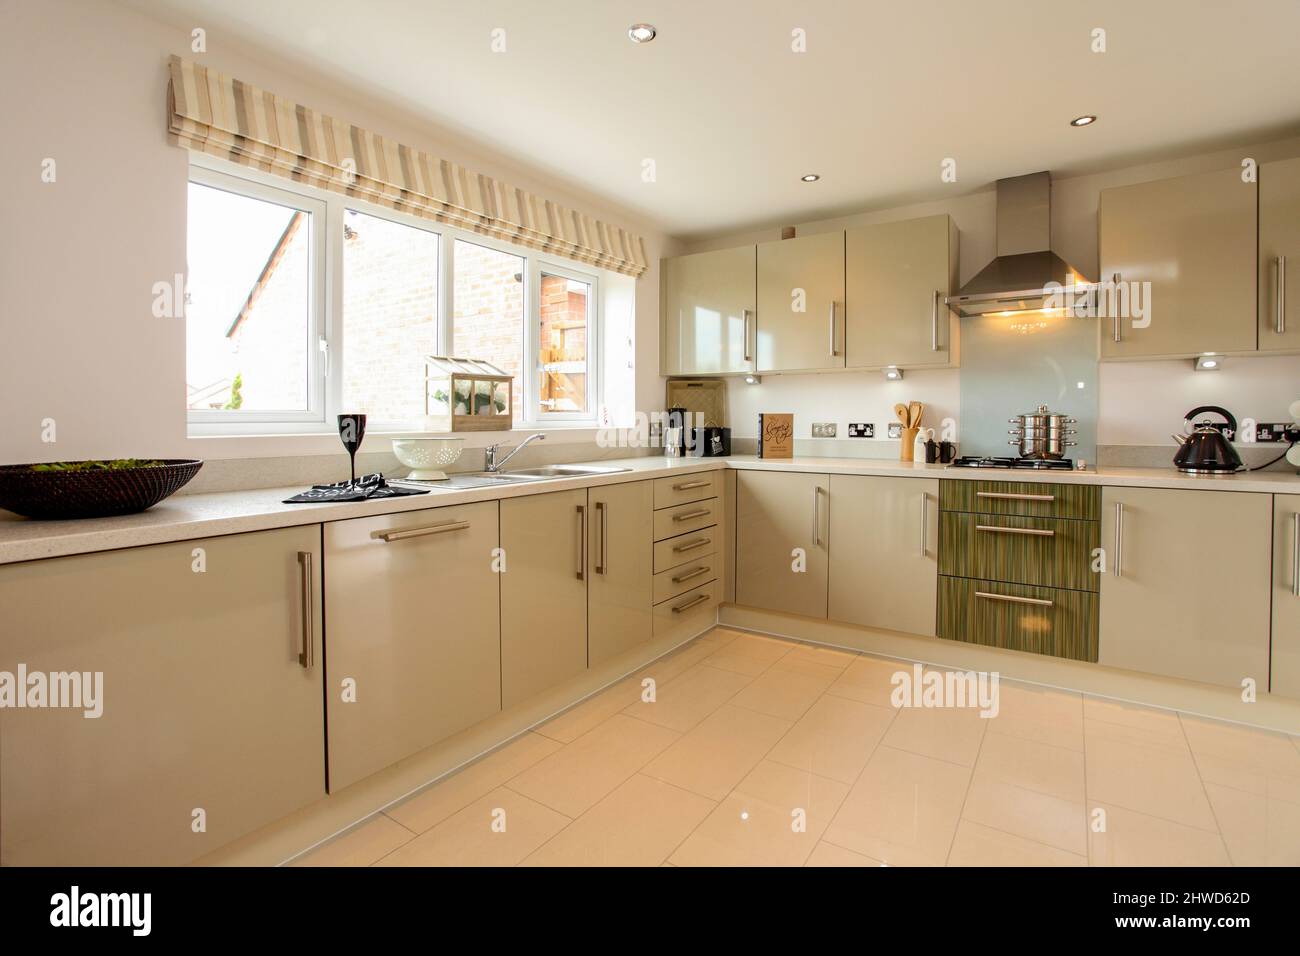 Kitchen in modern showhome, fitted kitchen units, floor and wall cupboards Stock Photo